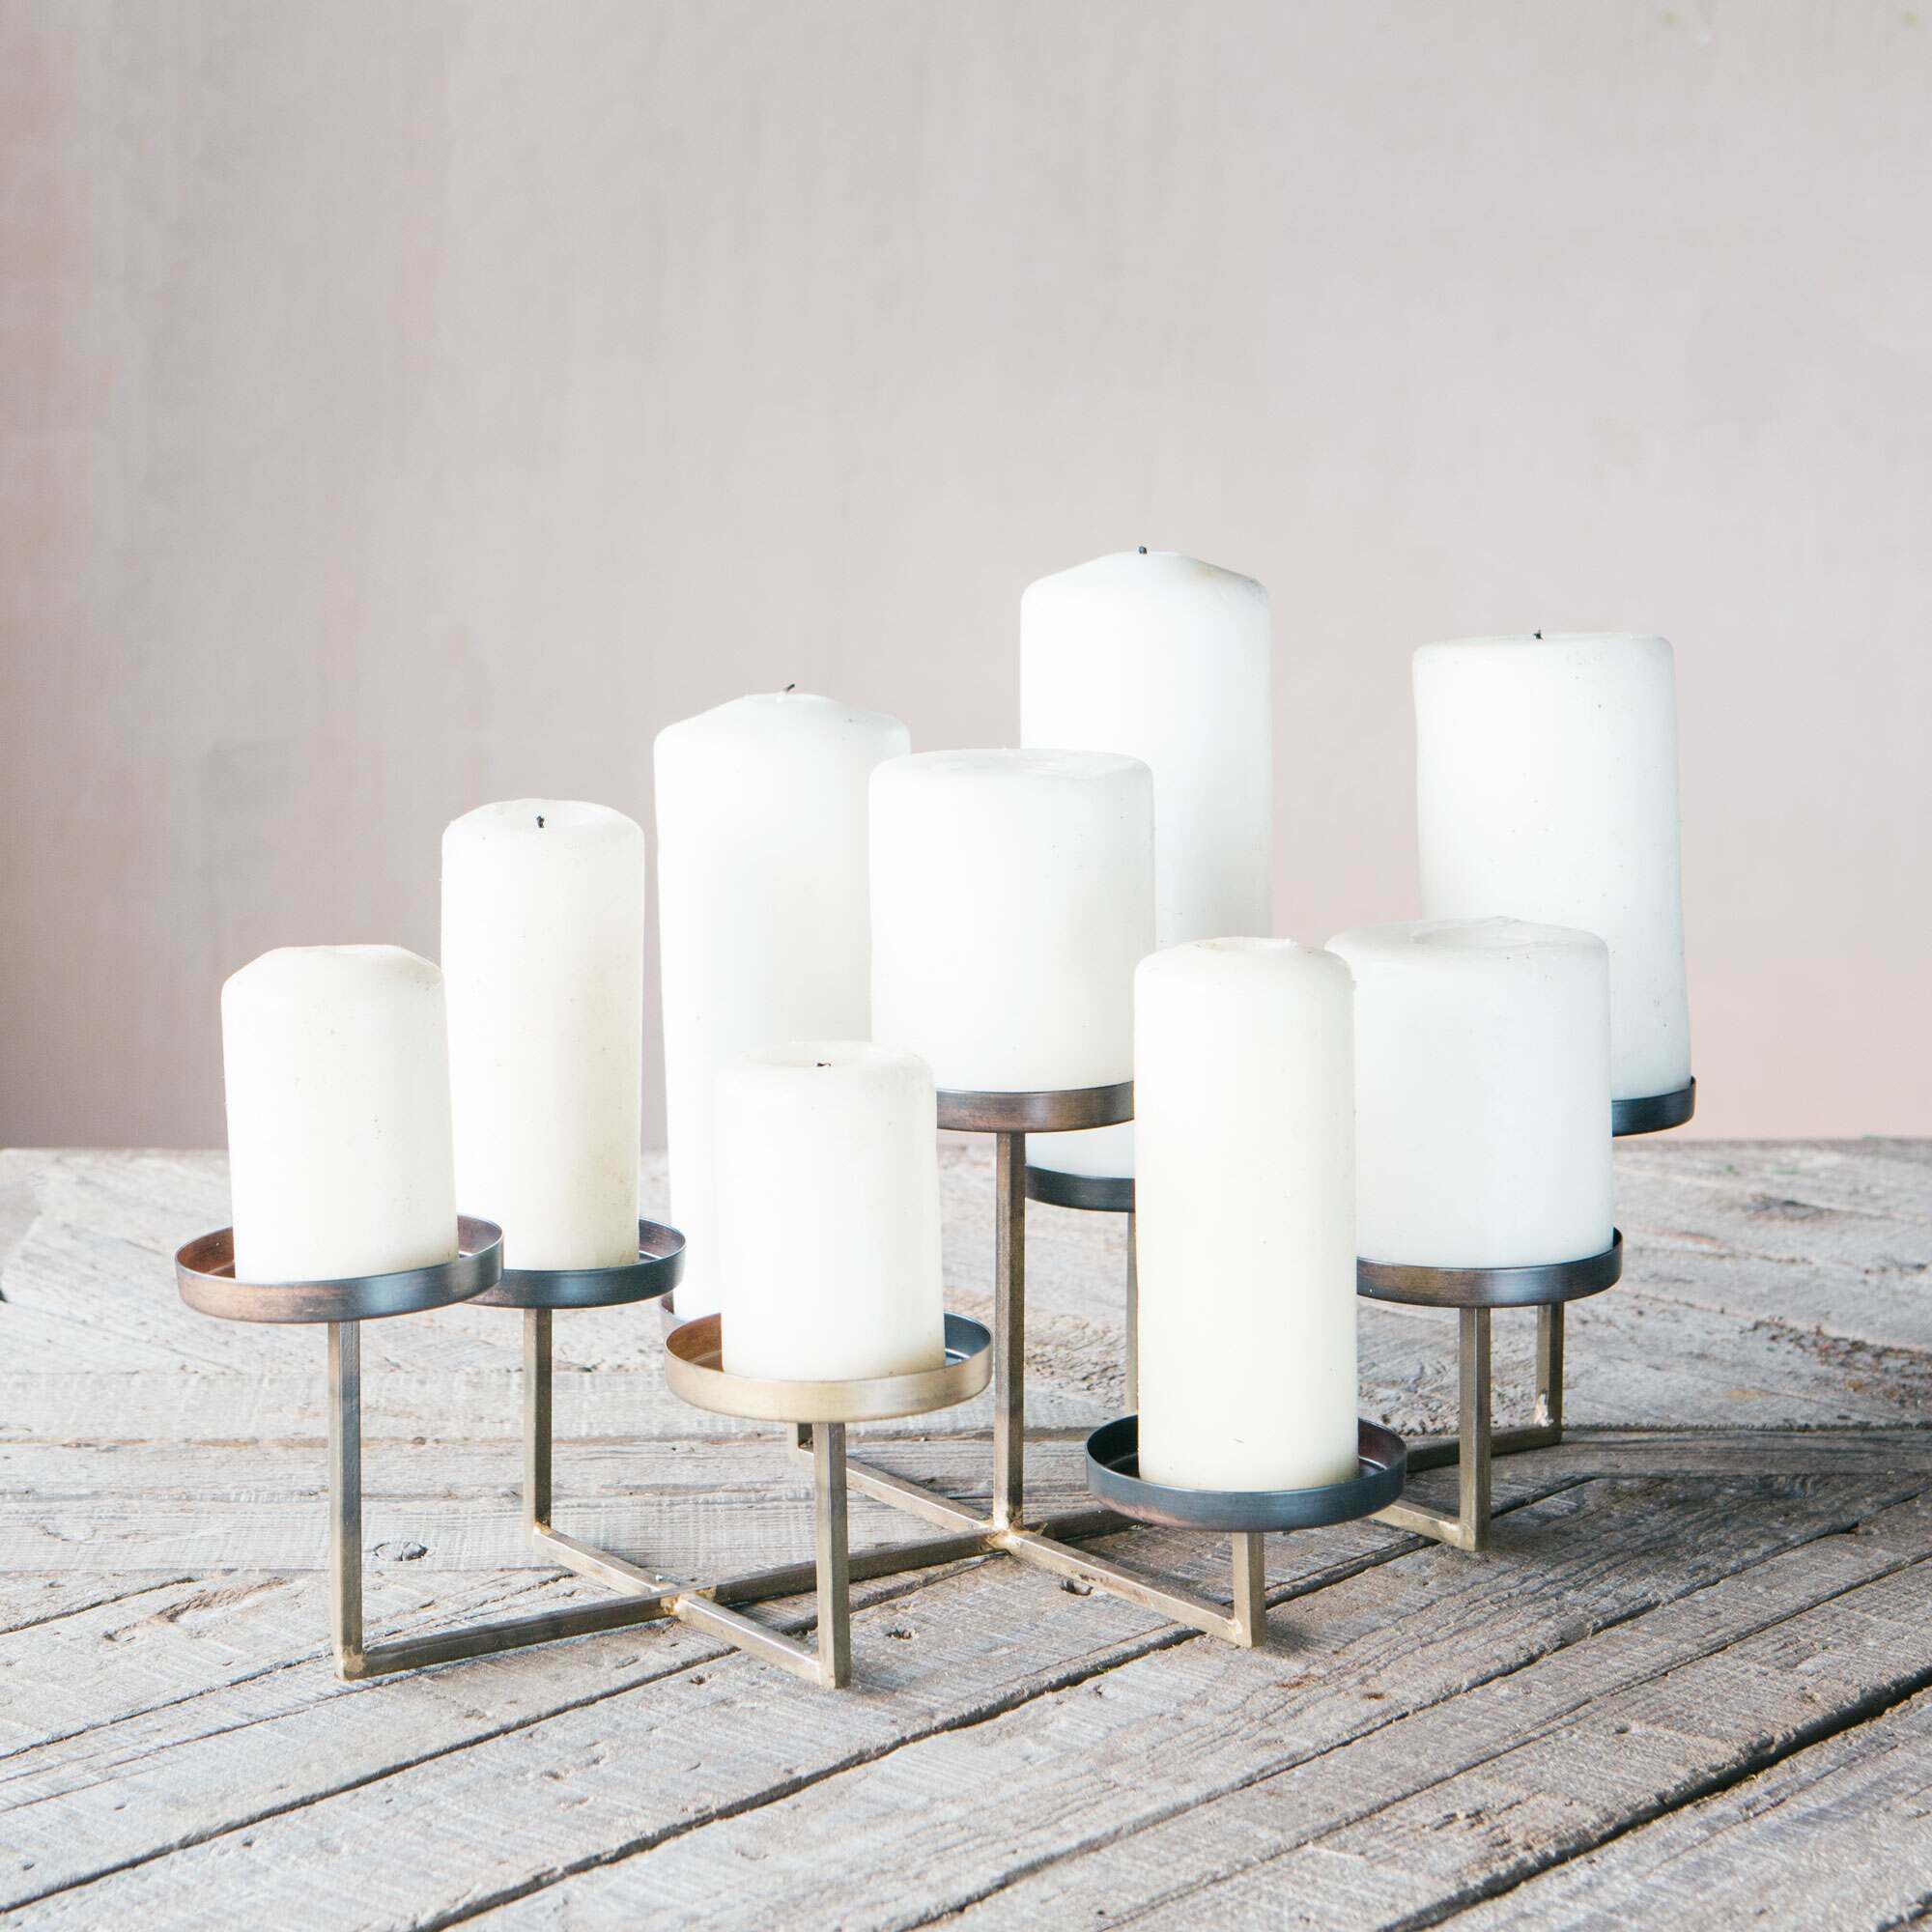 Read more about Graham and green milan circle multi pillar candle holder